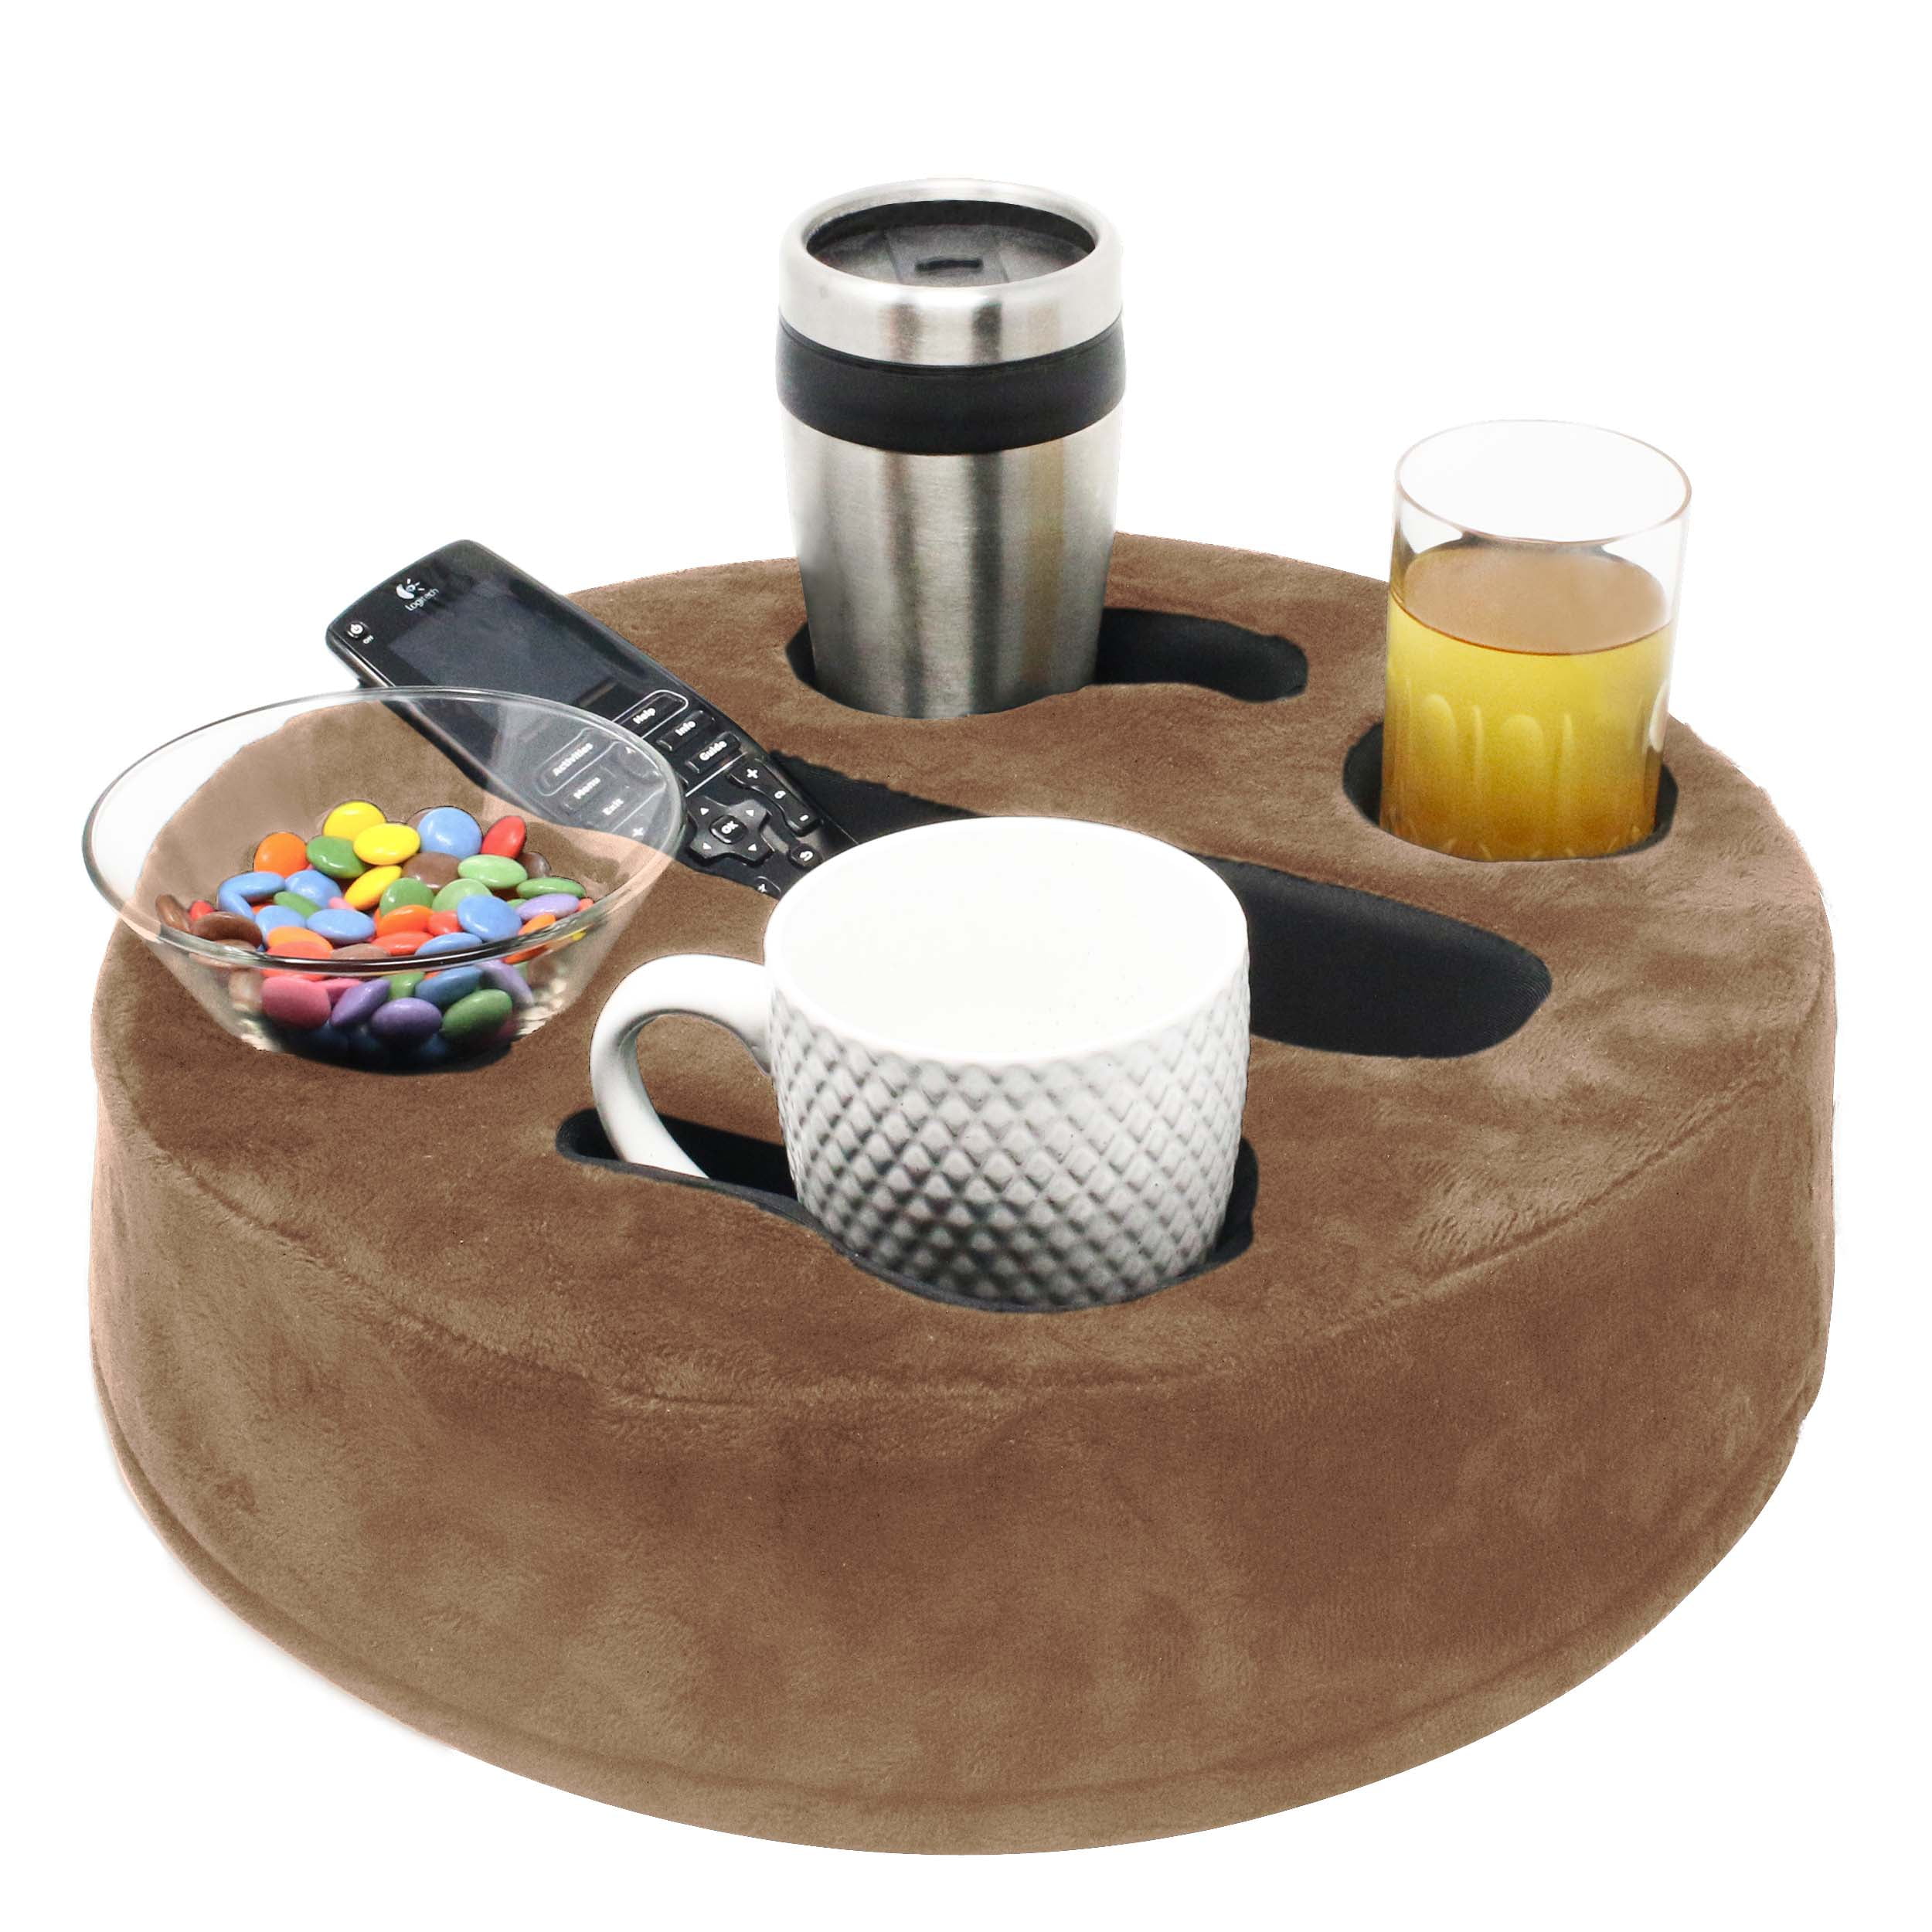 MOOKUNDY - Introducing Sofa Buddy - Convenient Couch Cup Holder